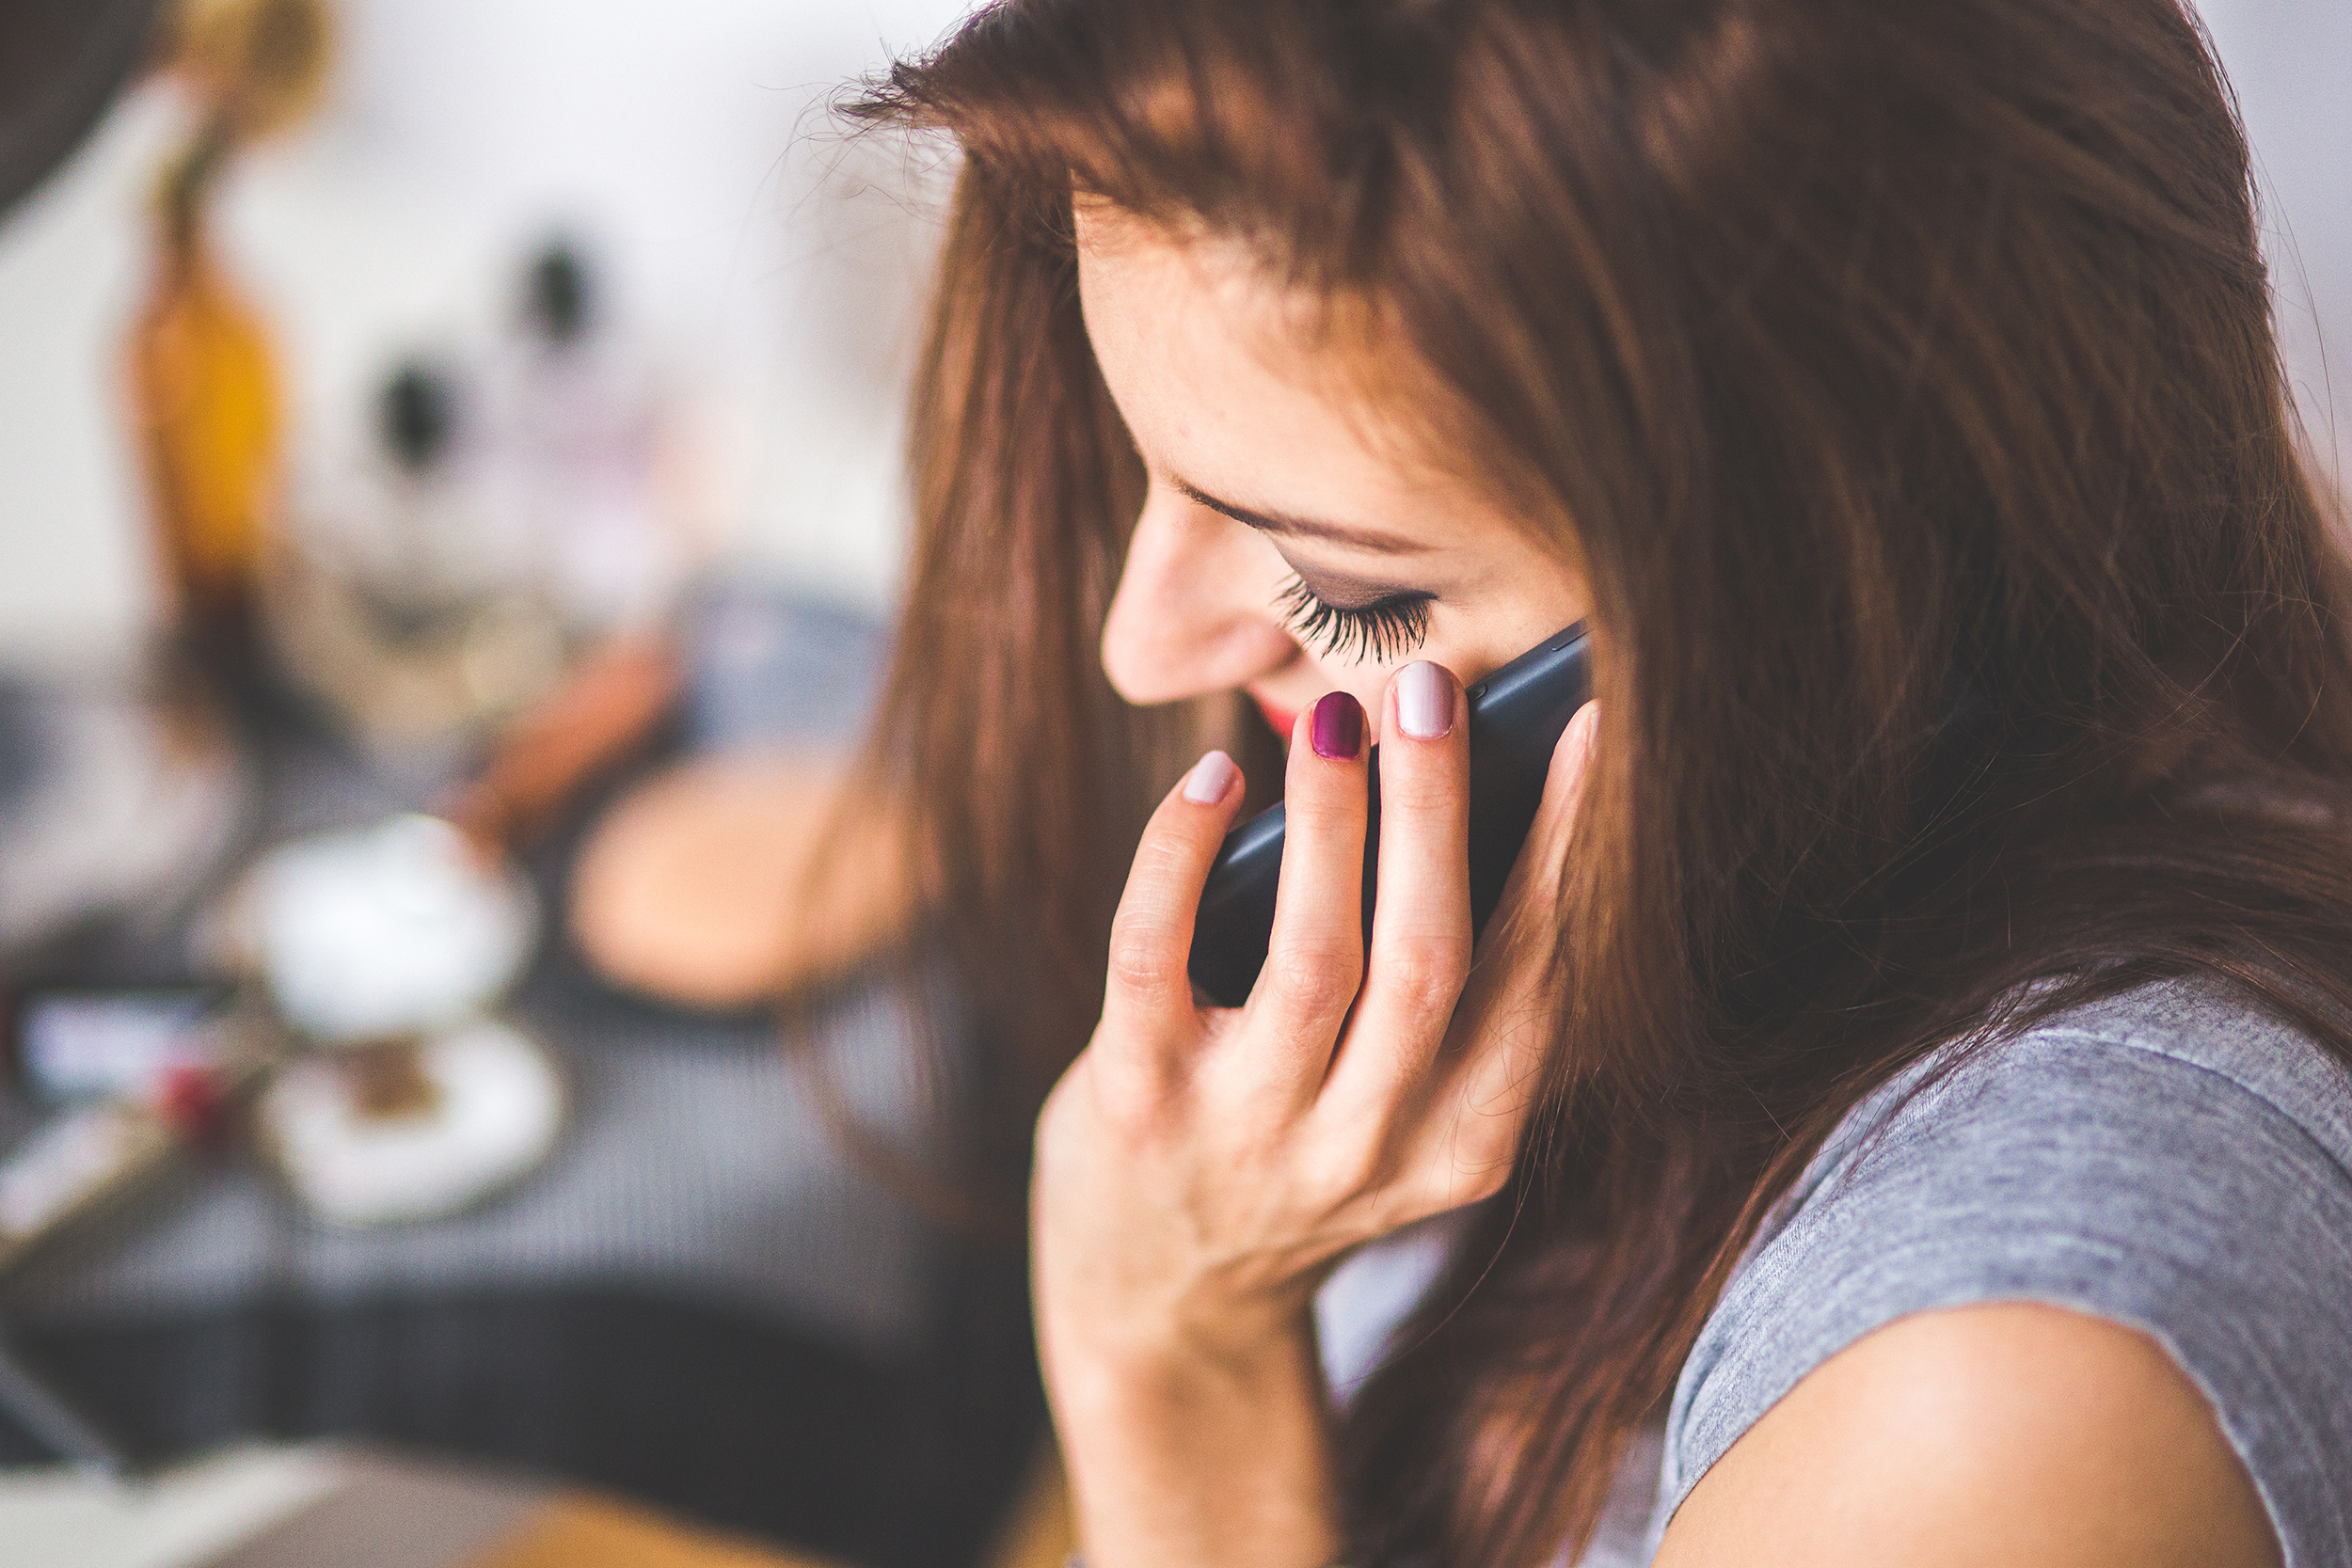 This image is of a woman talking on her cell phone. This image could depict someone who is needing online therapy in North Carolina. Get connected with an online therapist in North Carolina today! 28562 | 25015 | 27513